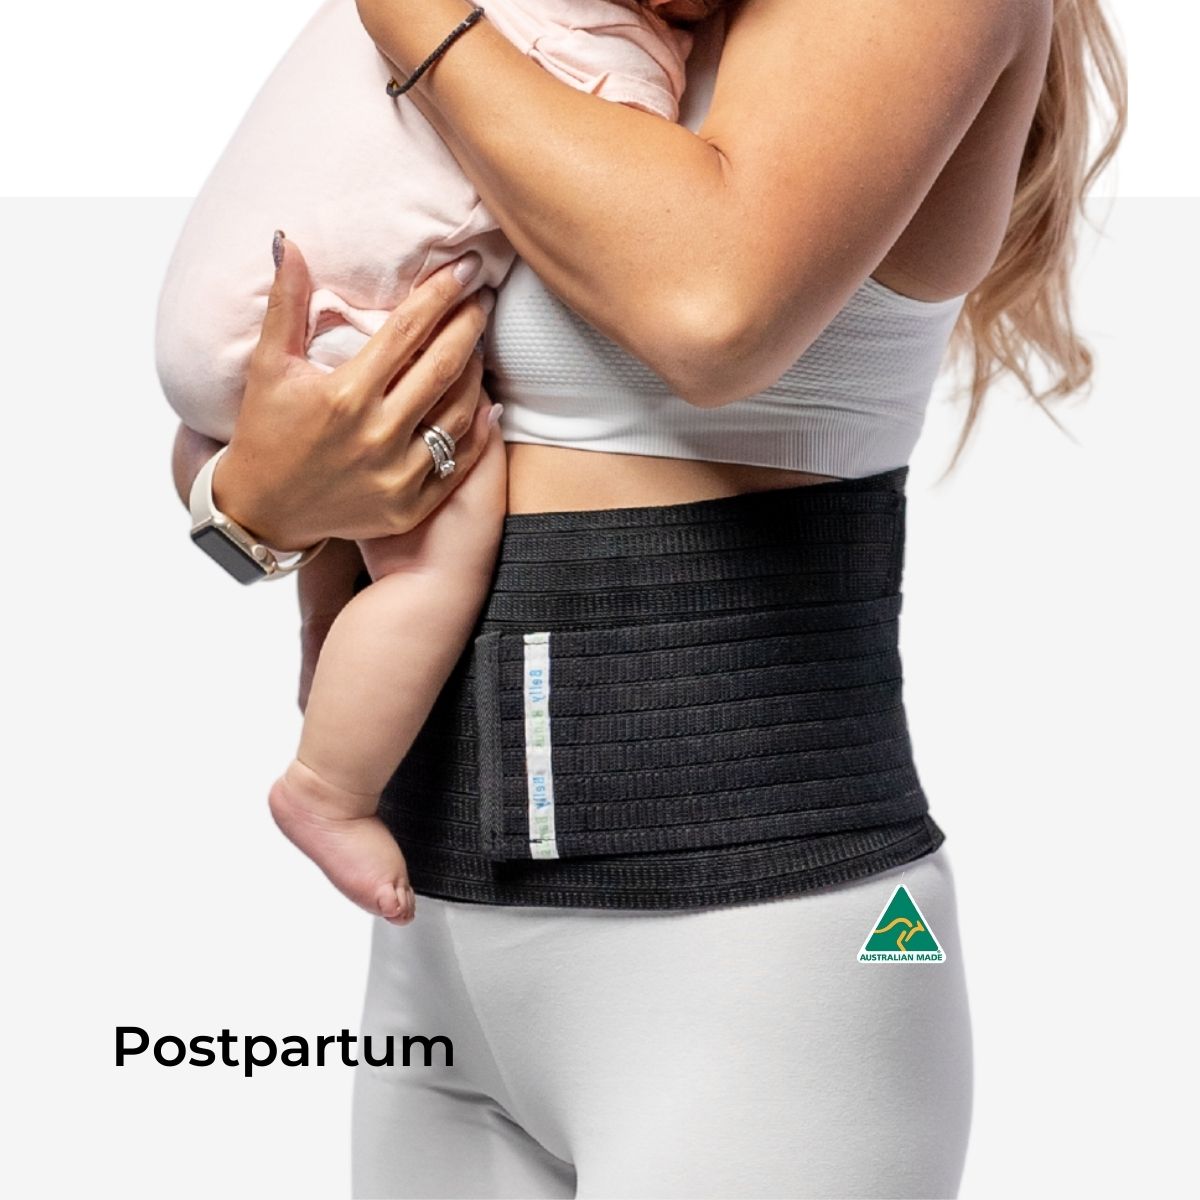 Post C-Section Abdominal Binders & Belly Bands For After C-Section